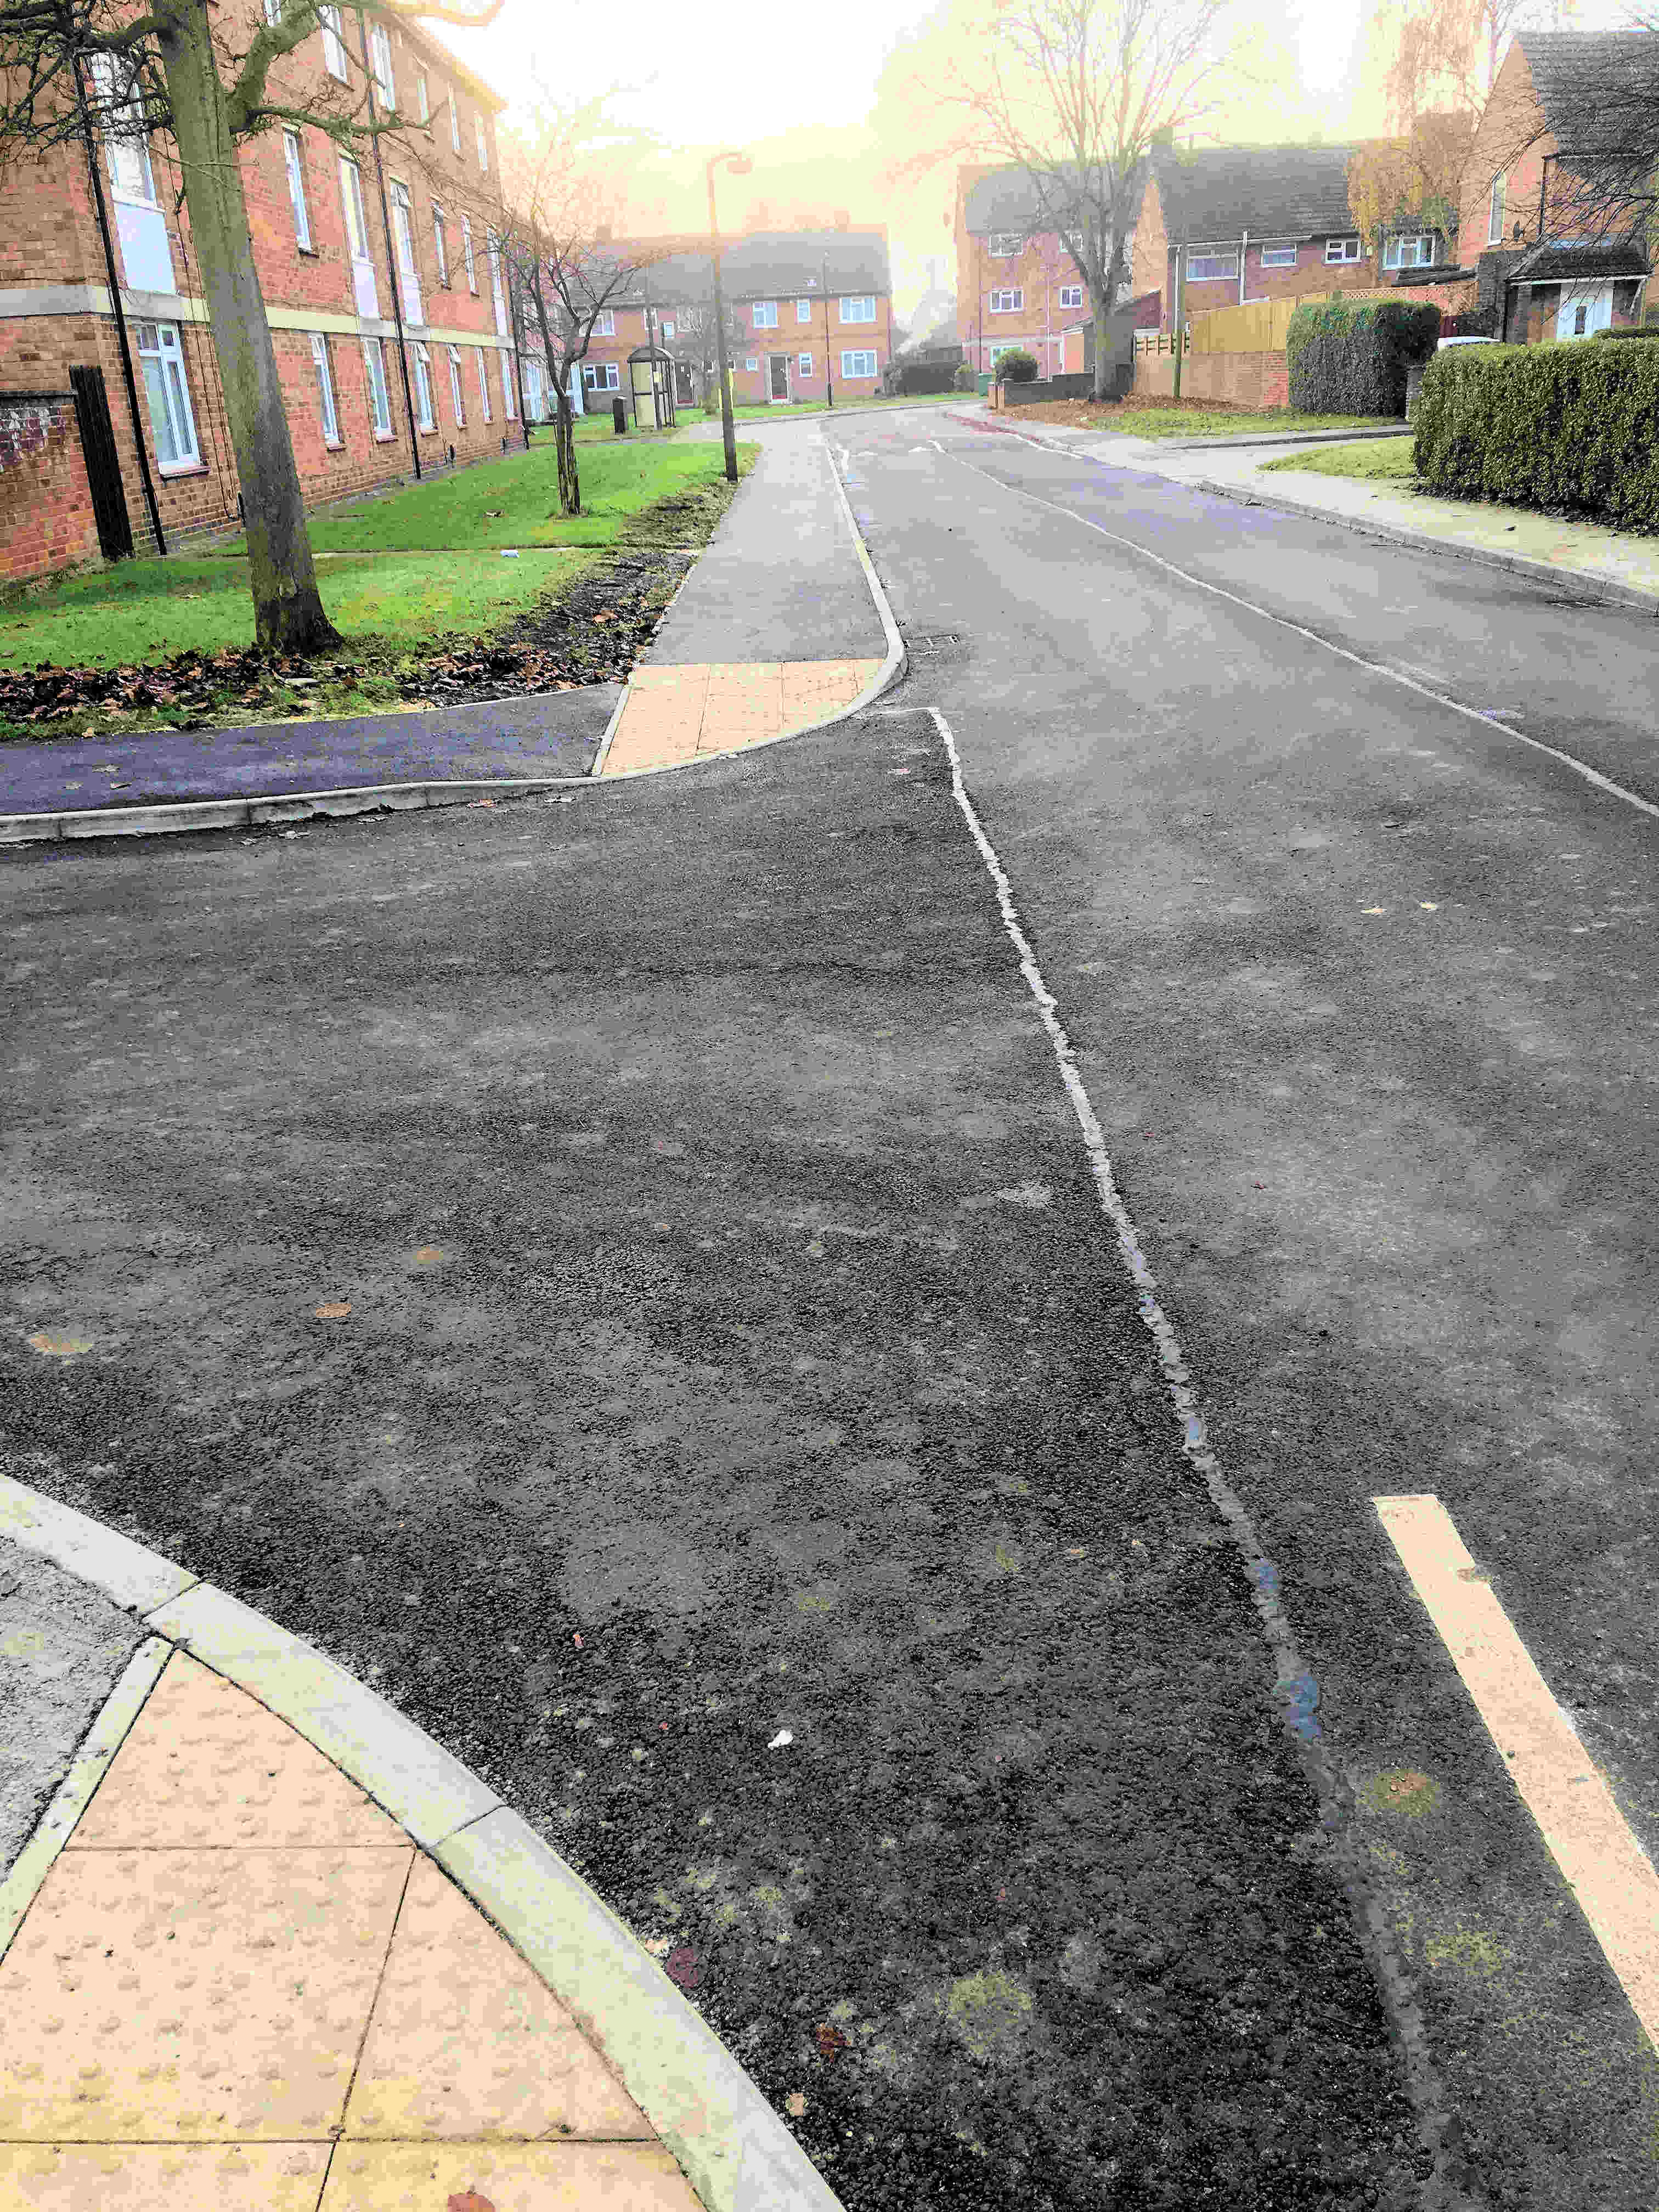 Some carrigeways have now been resurfaced